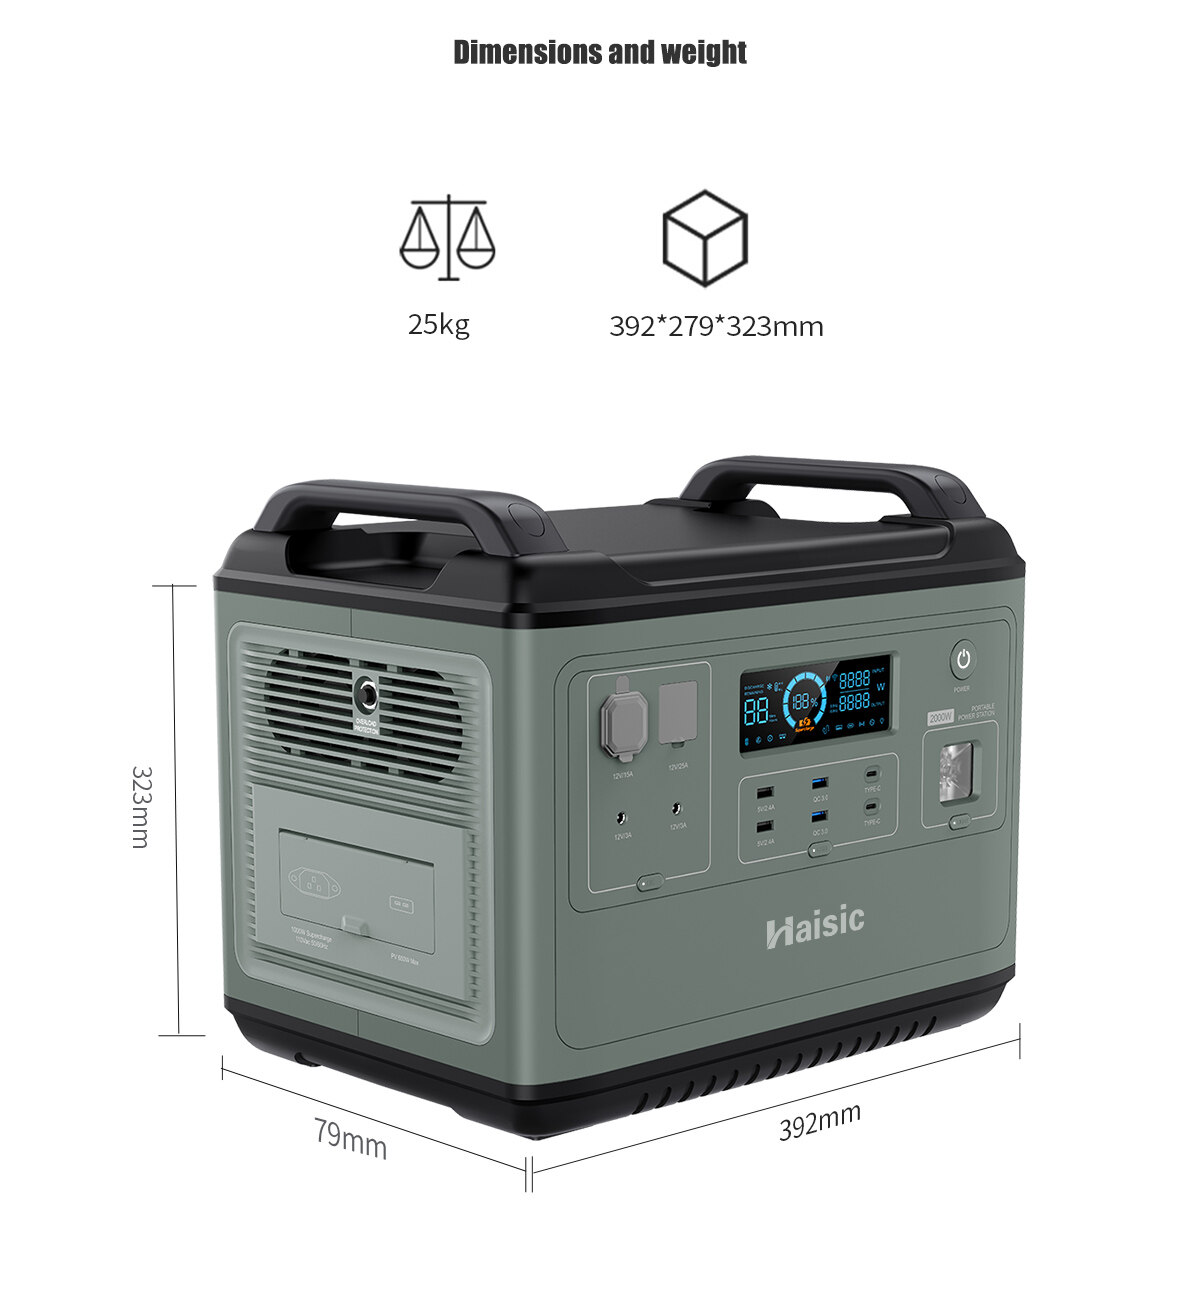 2000w portable power station dimensions and weight